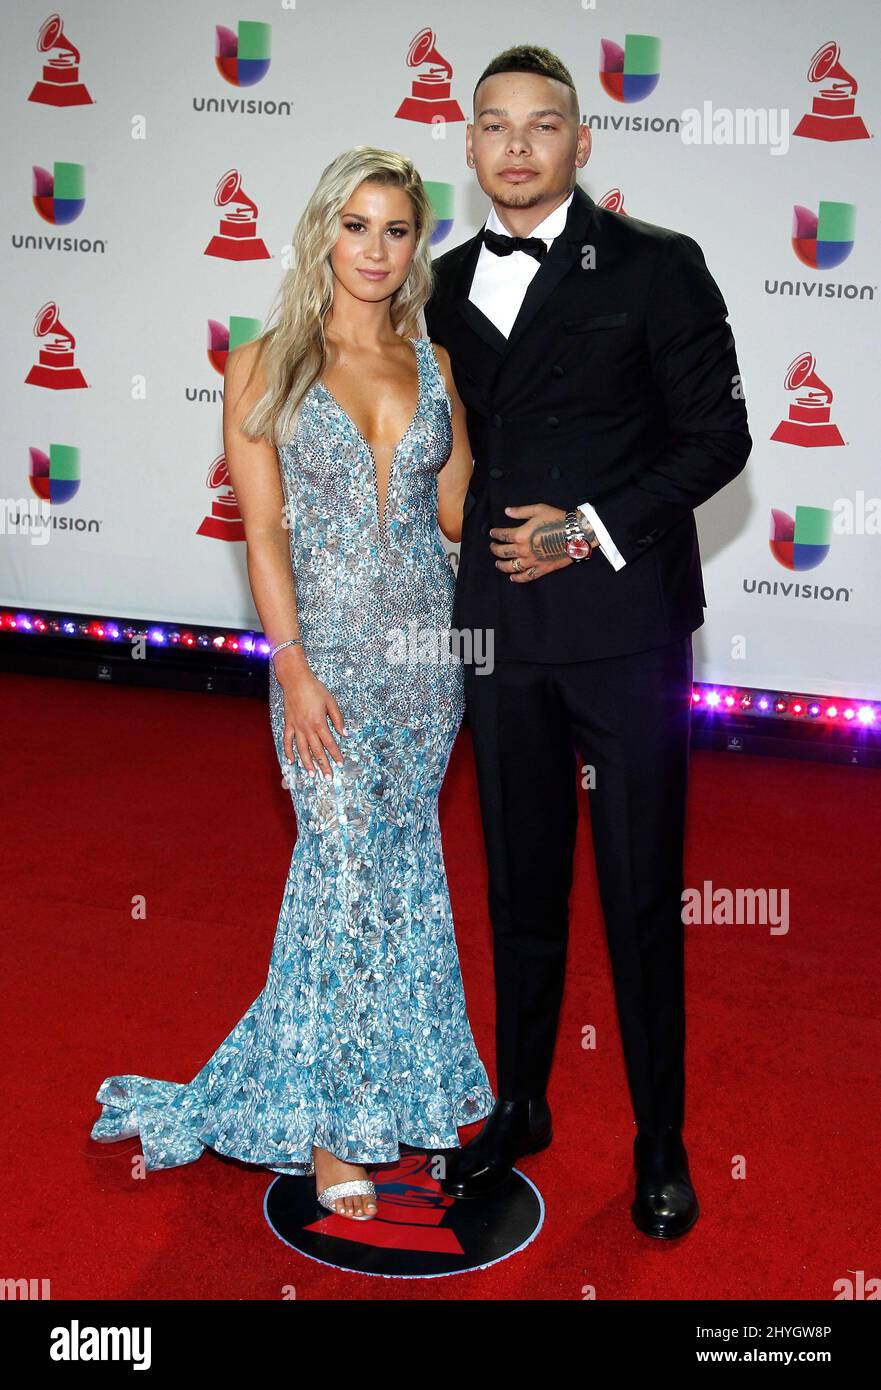 Katelyn Jae and Kane Brown at the 19th Annual Latin Grammy Awards held at the MGM Grand Garden Arena Stock Photo